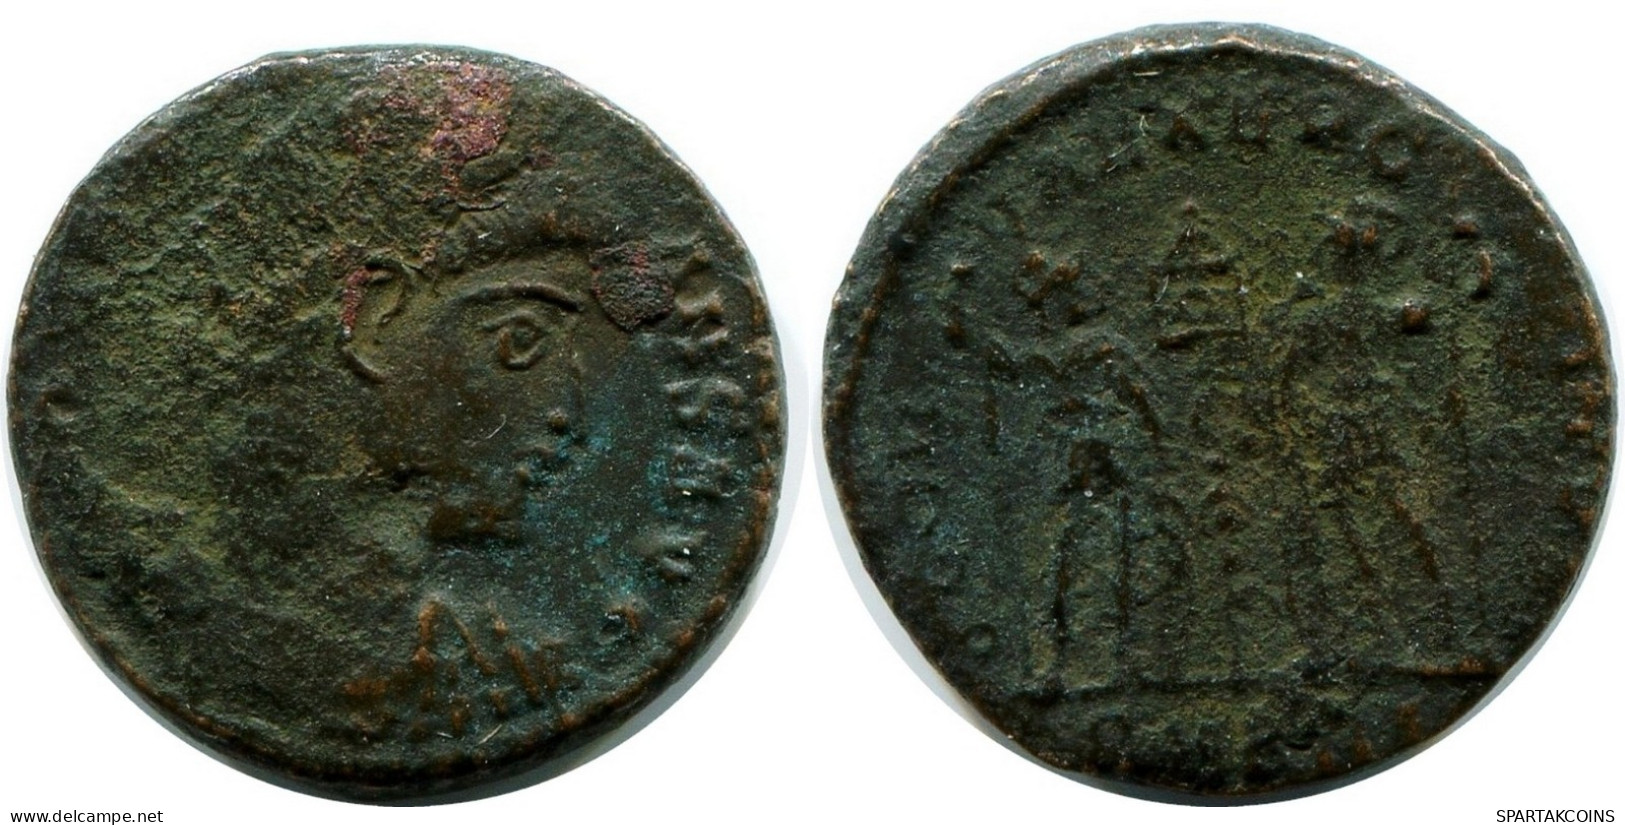 CONSTANS MINTED IN ANTIOCH FROM THE ROYAL ONTARIO MUSEUM #ANC11817.14.E.A - El Impero Christiano (307 / 363)